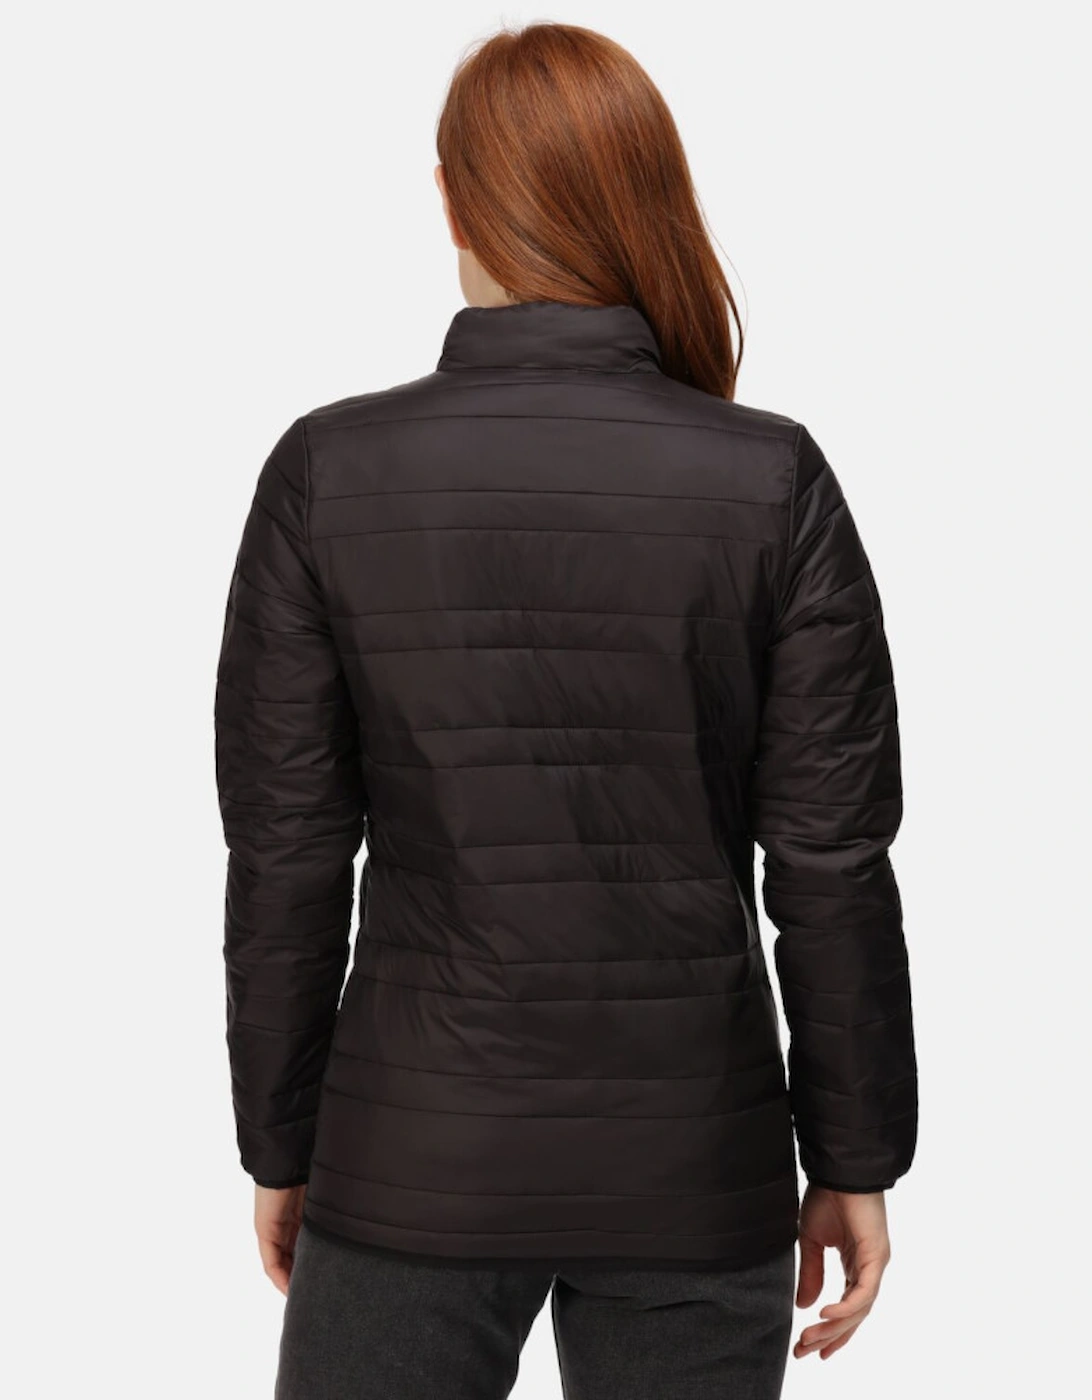 Professional Womens Firedown Insulated Jacket